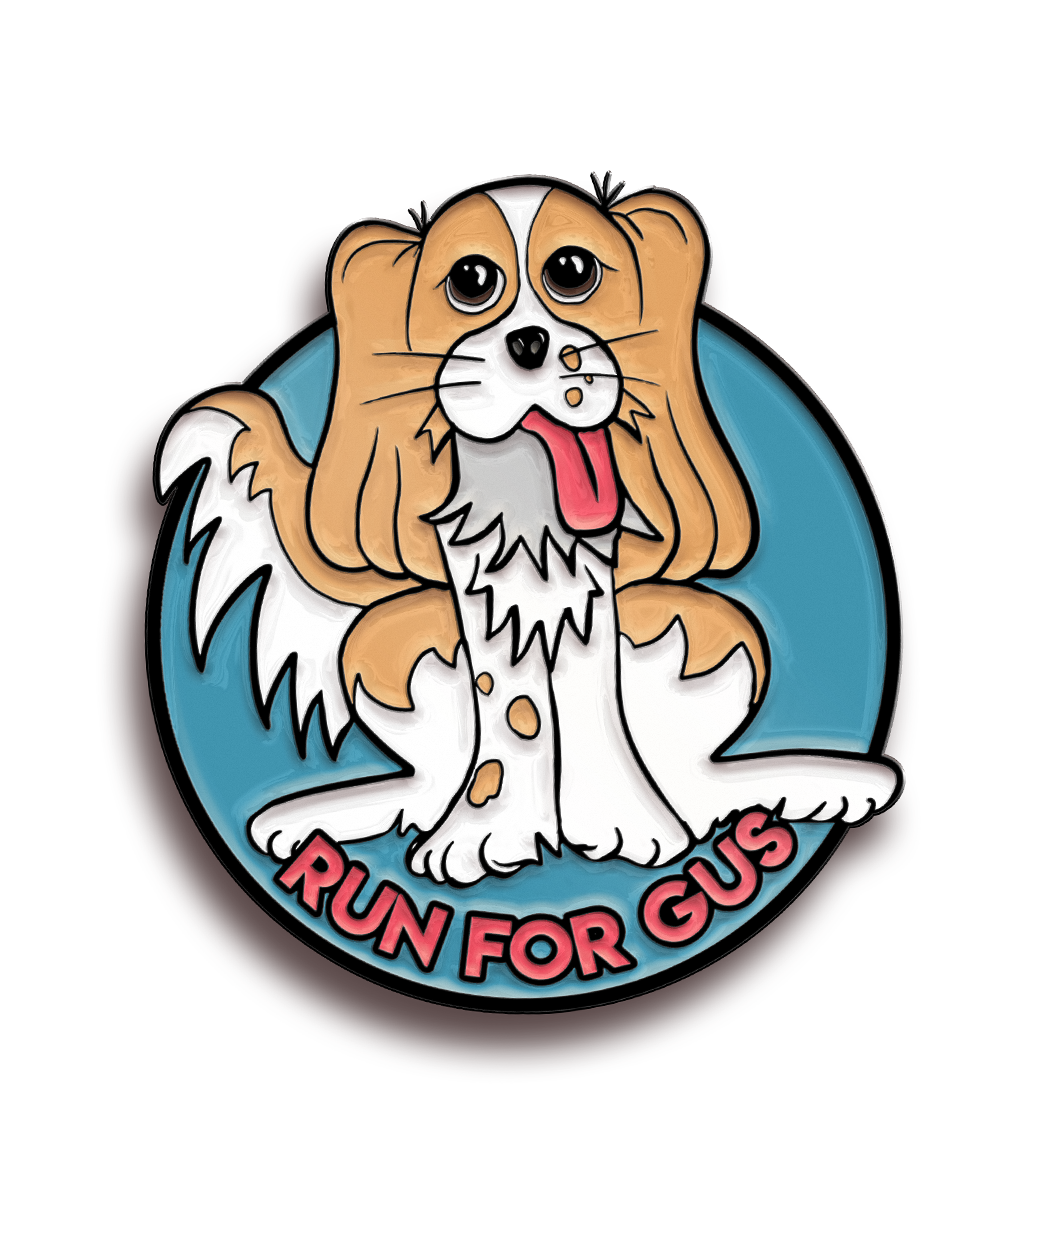 A blue circular pin with a black border. A white, gray, and tan cartoon drawn dog takes up the majority of the pin, parts of it breaking the boundary of the circle. “Run for Gus” is in red sans serif font at the bottom - from The Ginger Runner